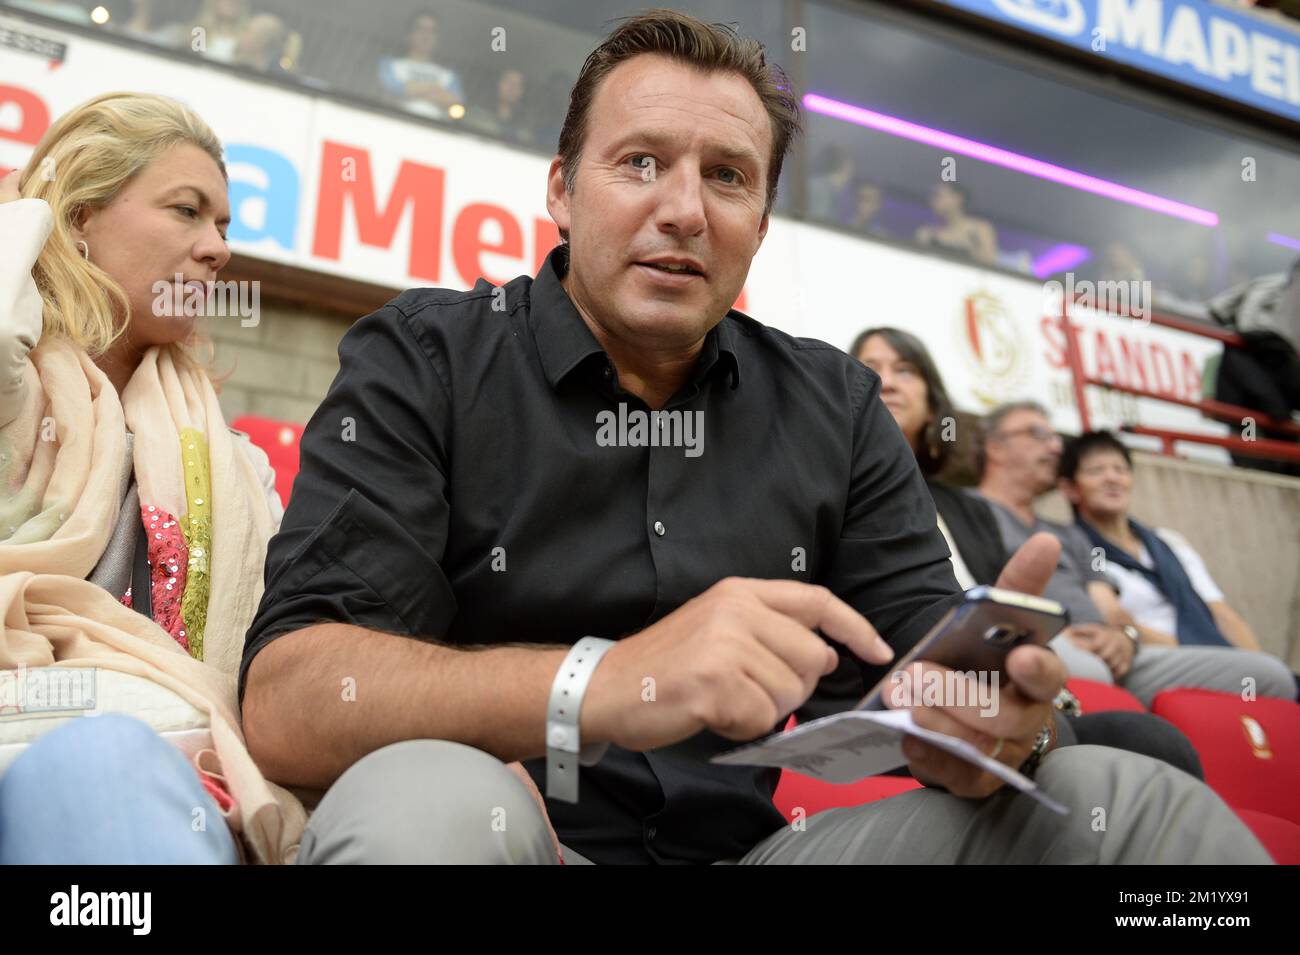 Marc Wilmots pictured before the Jupiler Pro League match between Standard de Liege and KV Oostende, in Liege, Sunday 23 August 2015, on day 05 of the Belgian soccer championship.  Stock Photo